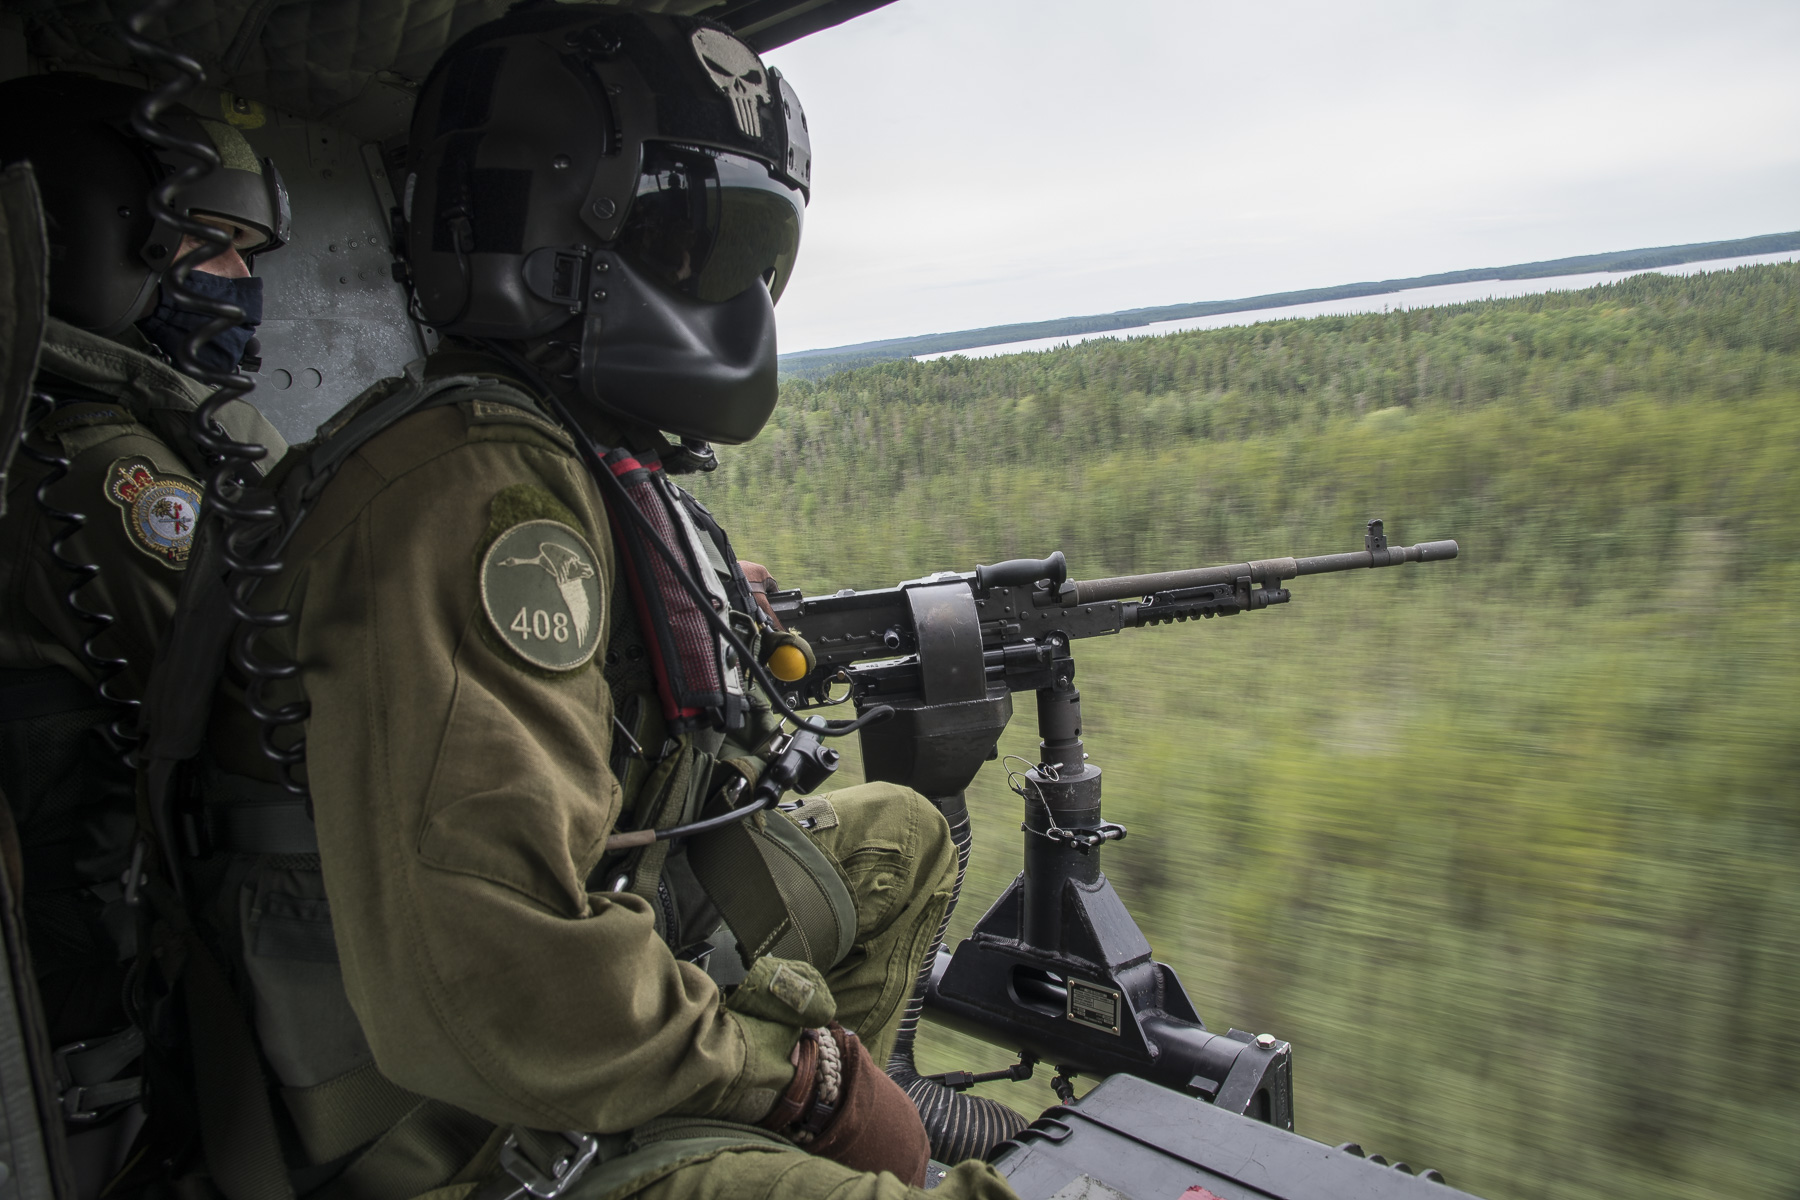 Two men wearing green flight suits and black helmets, one of which mans a machine gun, sit at the open door of a helicopter flying over a wooded area.